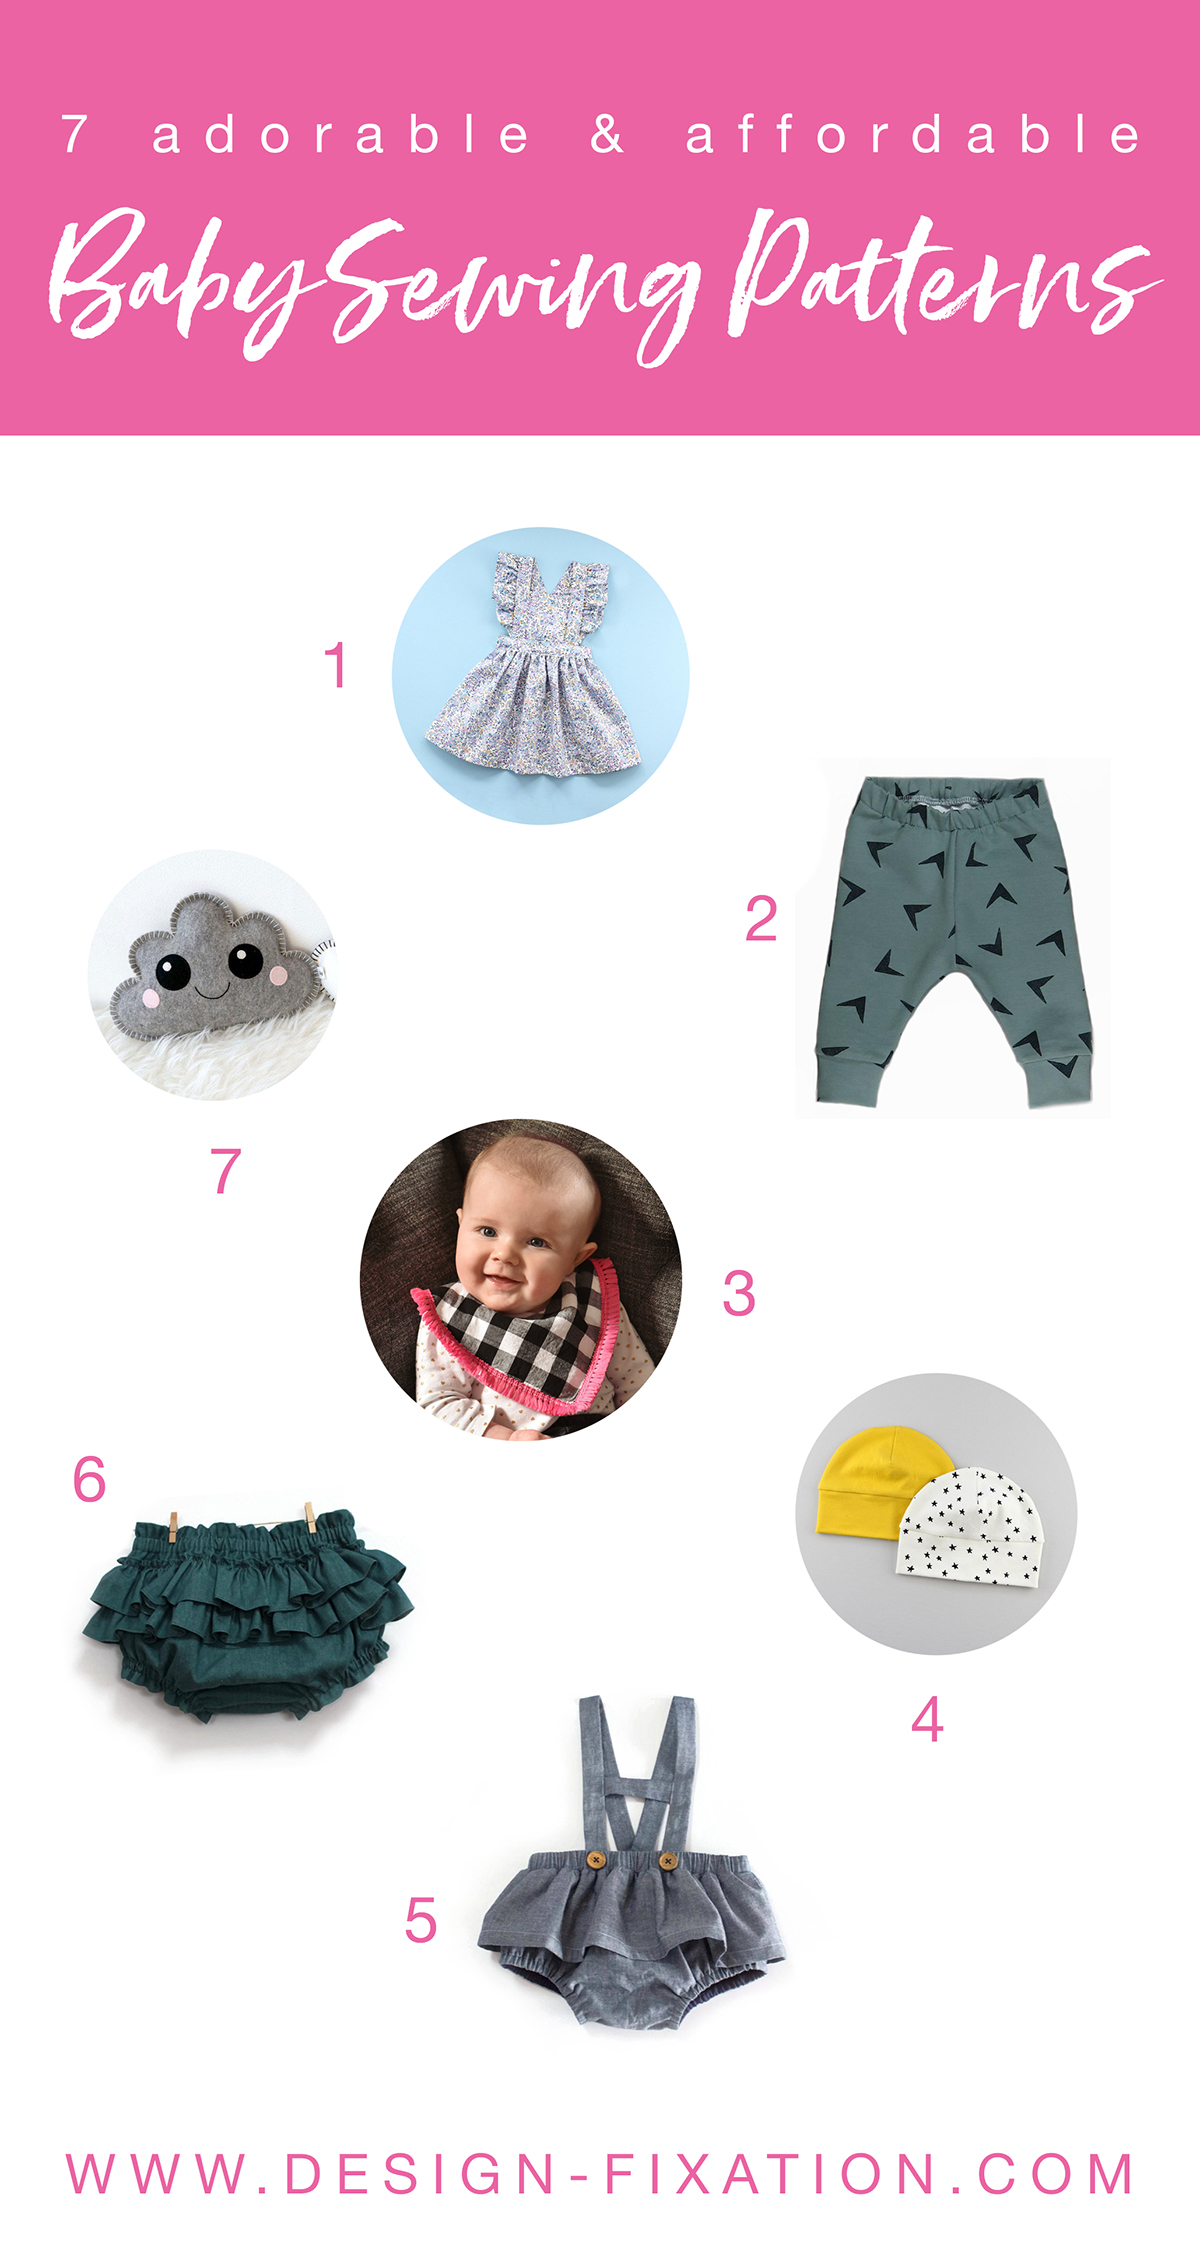 7 Adorable Baby Sewing Patterns /// By Design Fixation #baby_shower_gifts #sewing_pattern #baby_bib